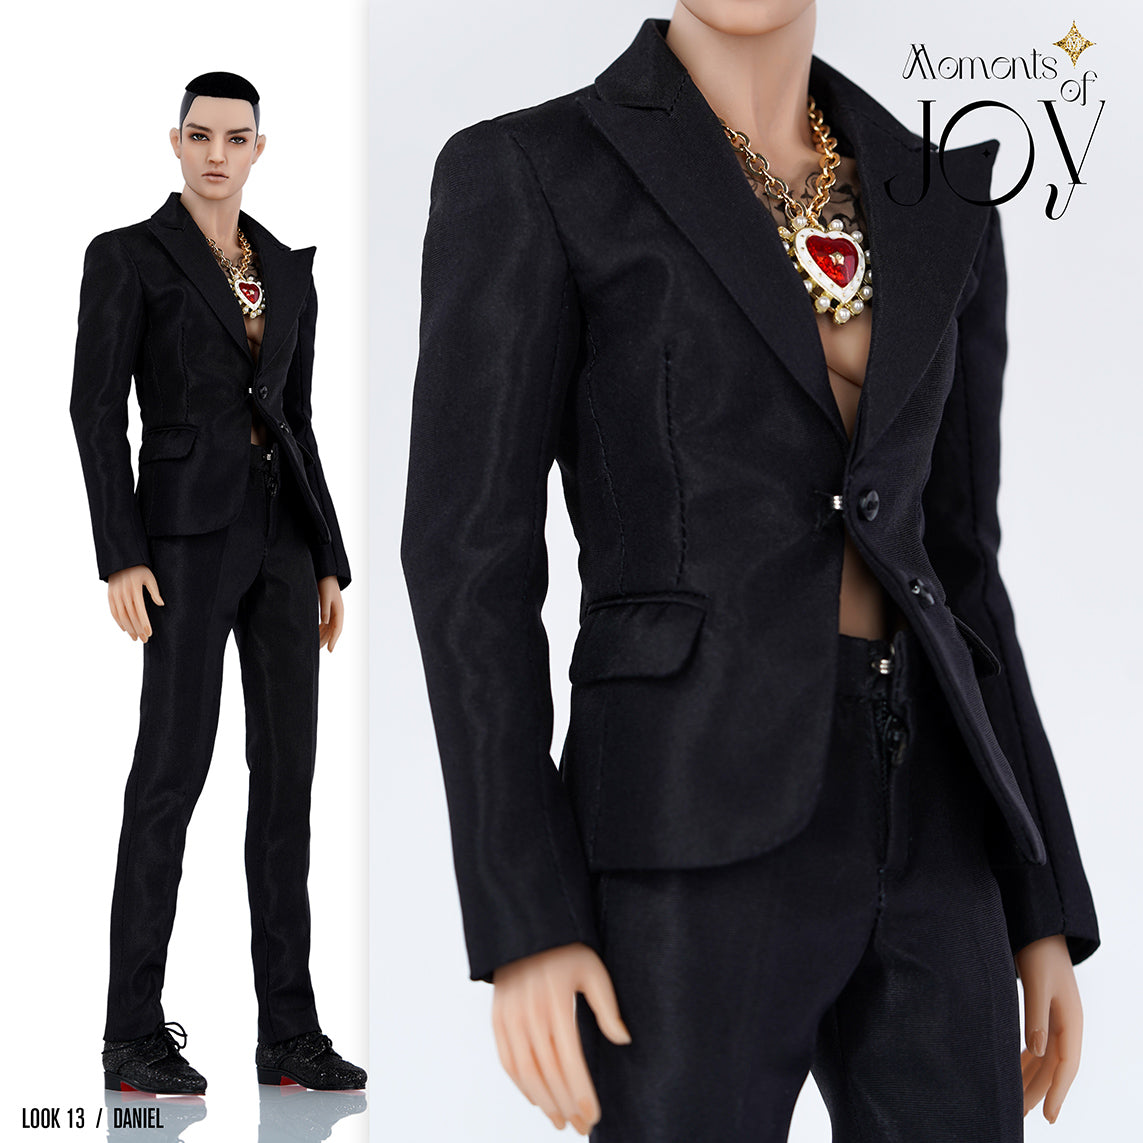 Muses Moments of Joy Men's Fashion Look 13